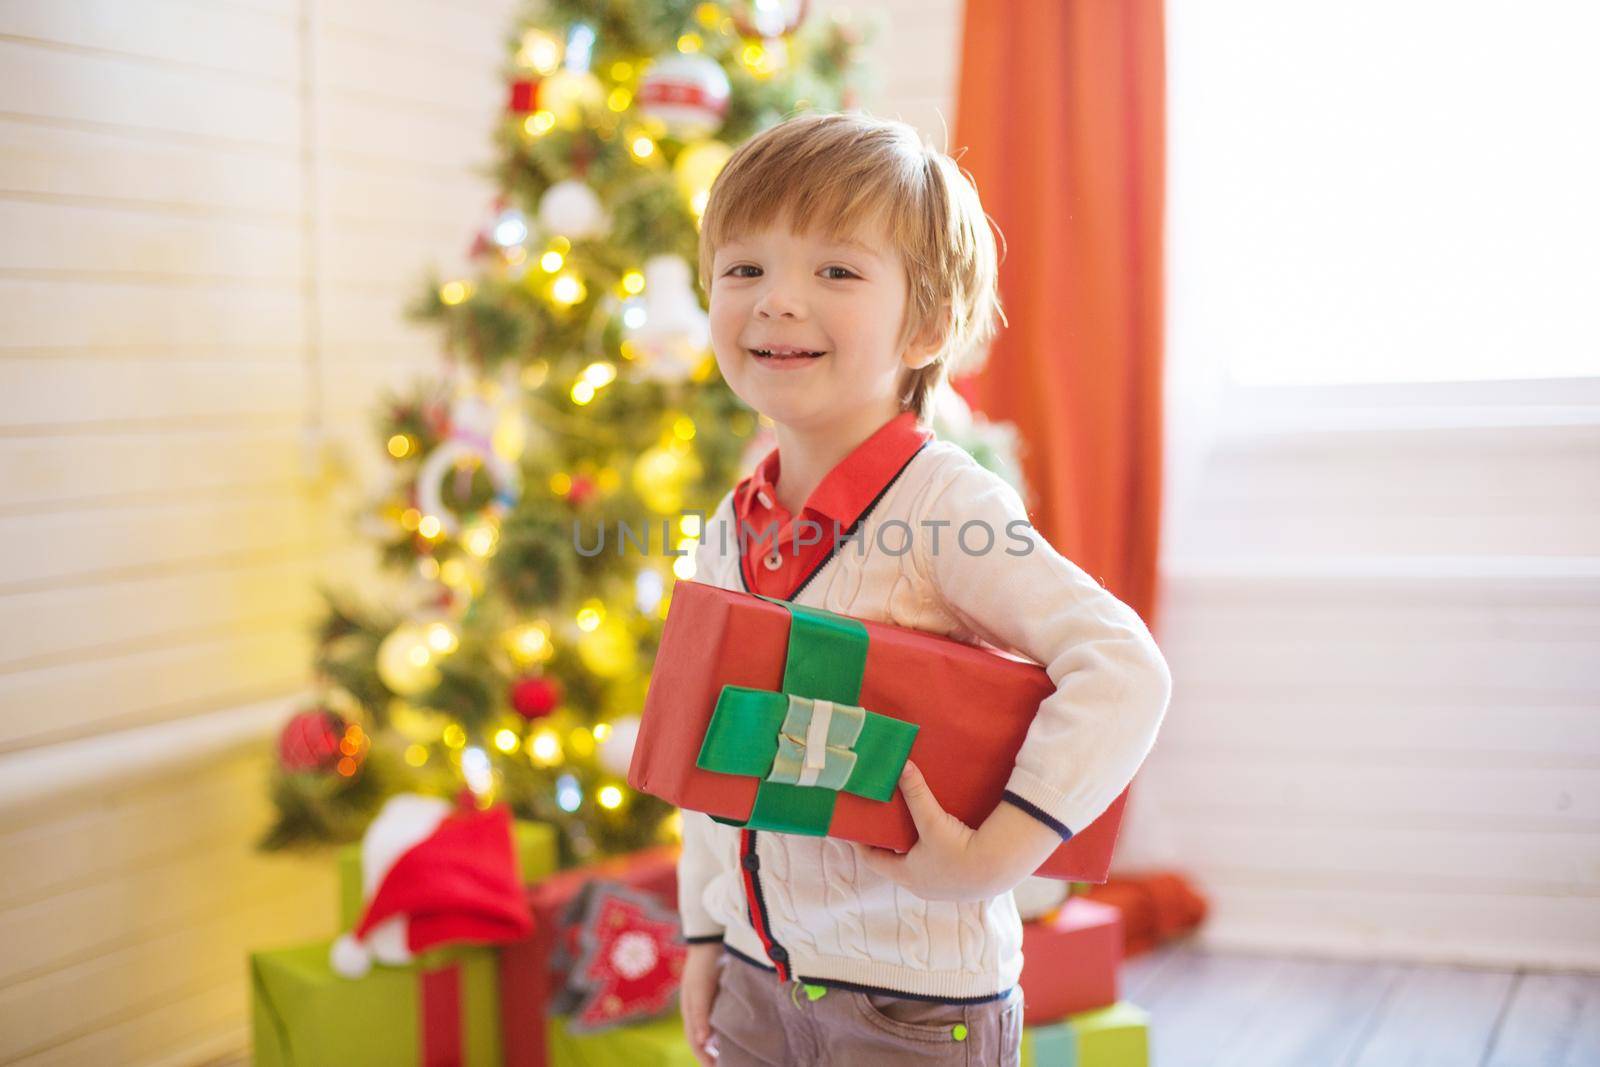 Little boy hold a gift box near a decorated Christmas tree at home by AlikMulikov